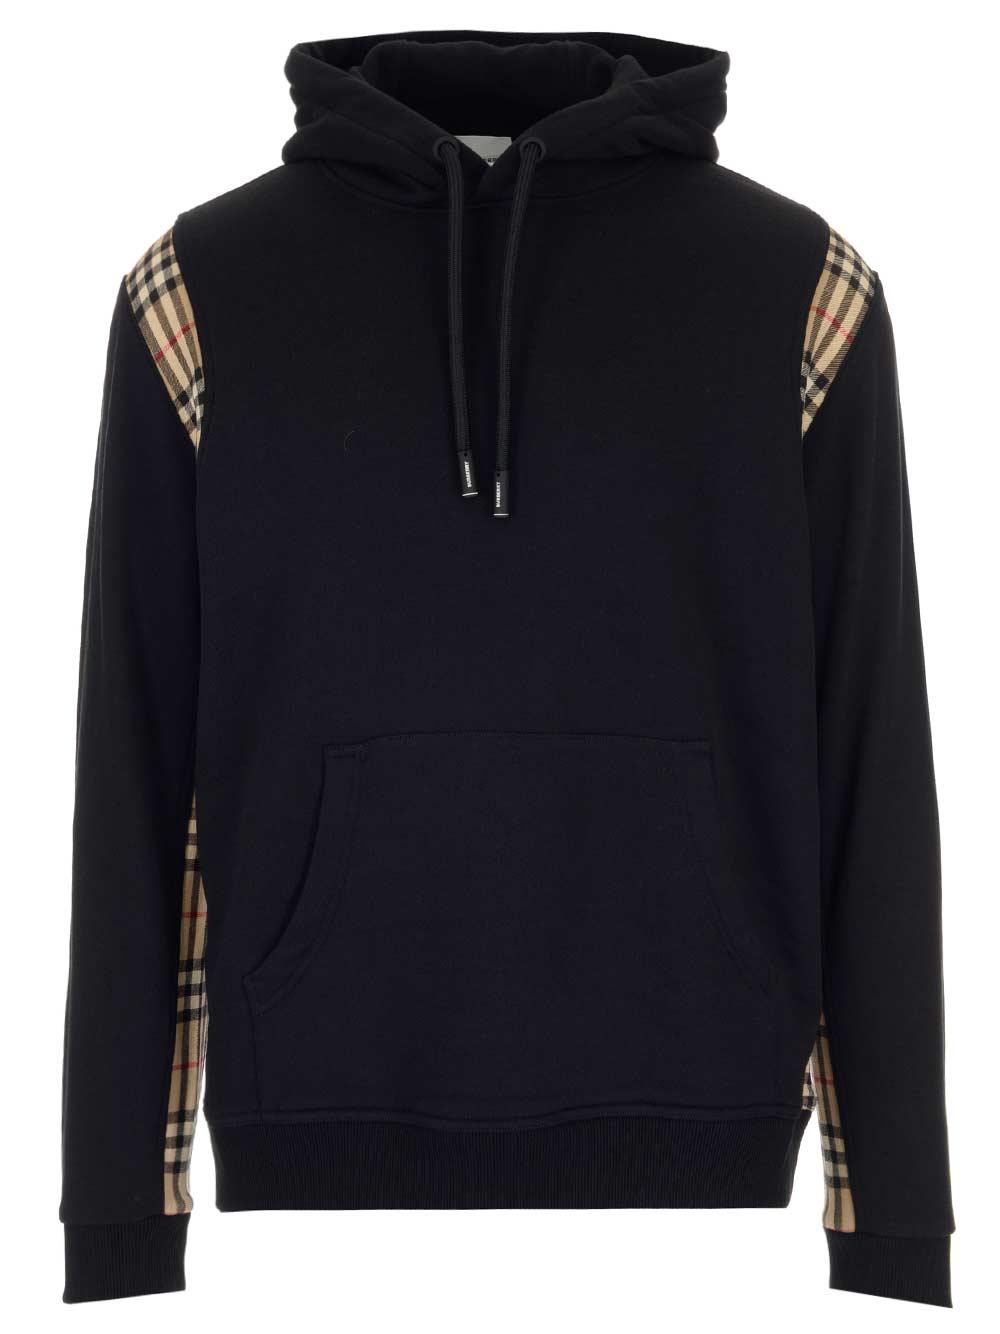 Burberry Cotton Vintage Check Panel Hoodie in Black for Men - Lyst